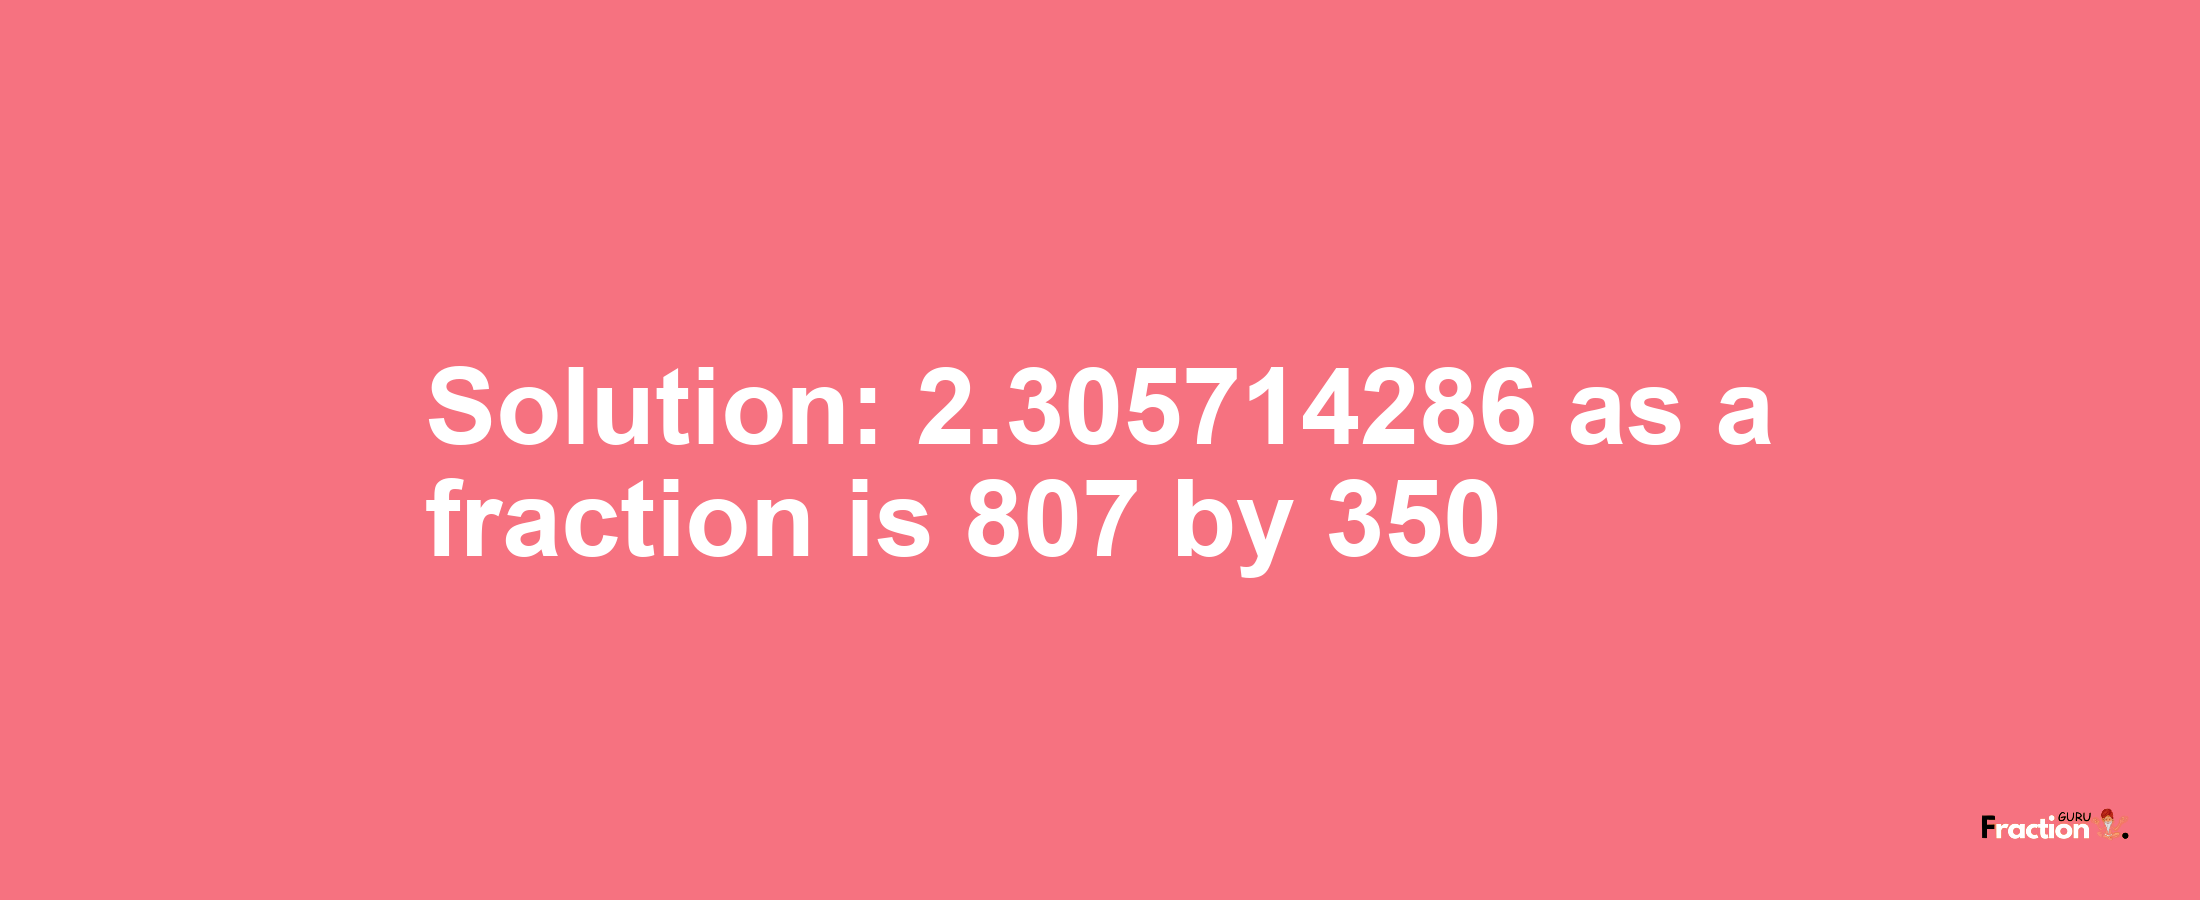 Solution:2.305714286 as a fraction is 807/350